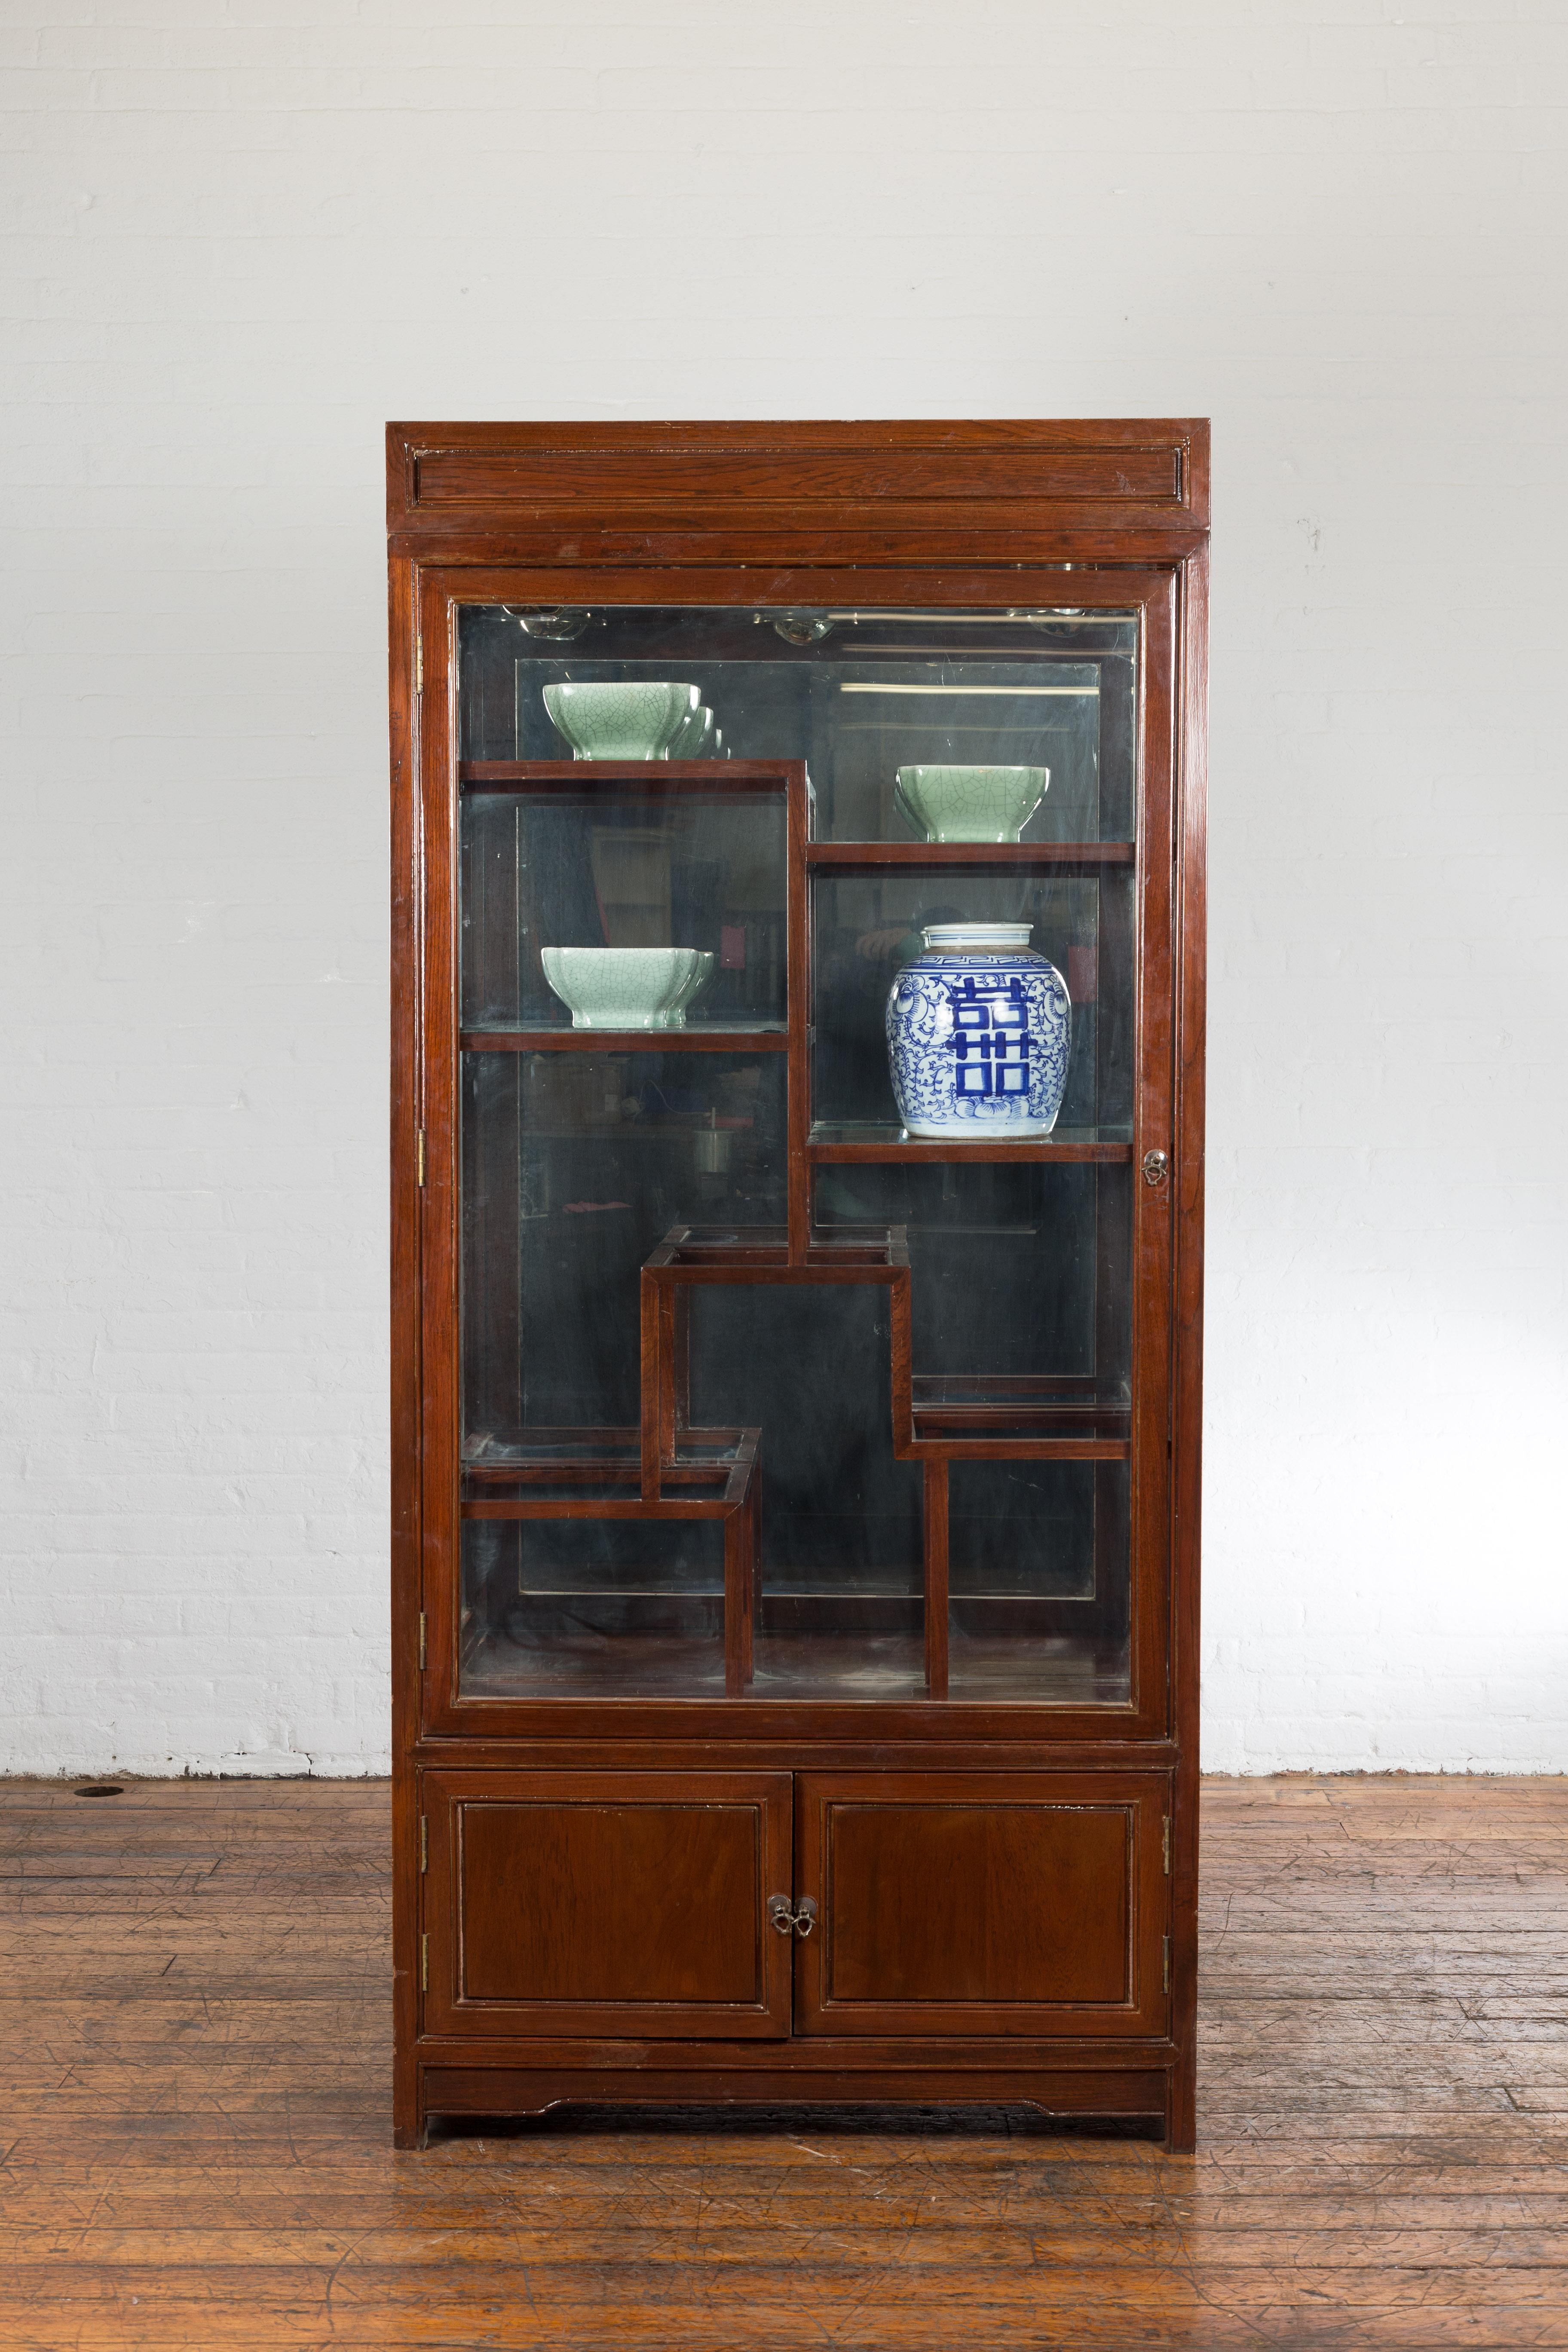 A Qing Dynasty style Thai vitrine cabinet from the late 20th century, with glass as well as wooden doors, retrofitted with glass shelves, spot lights and mirrored wall. This Qing Dynasty style vitrine cabinet from the last quarter of the 20th